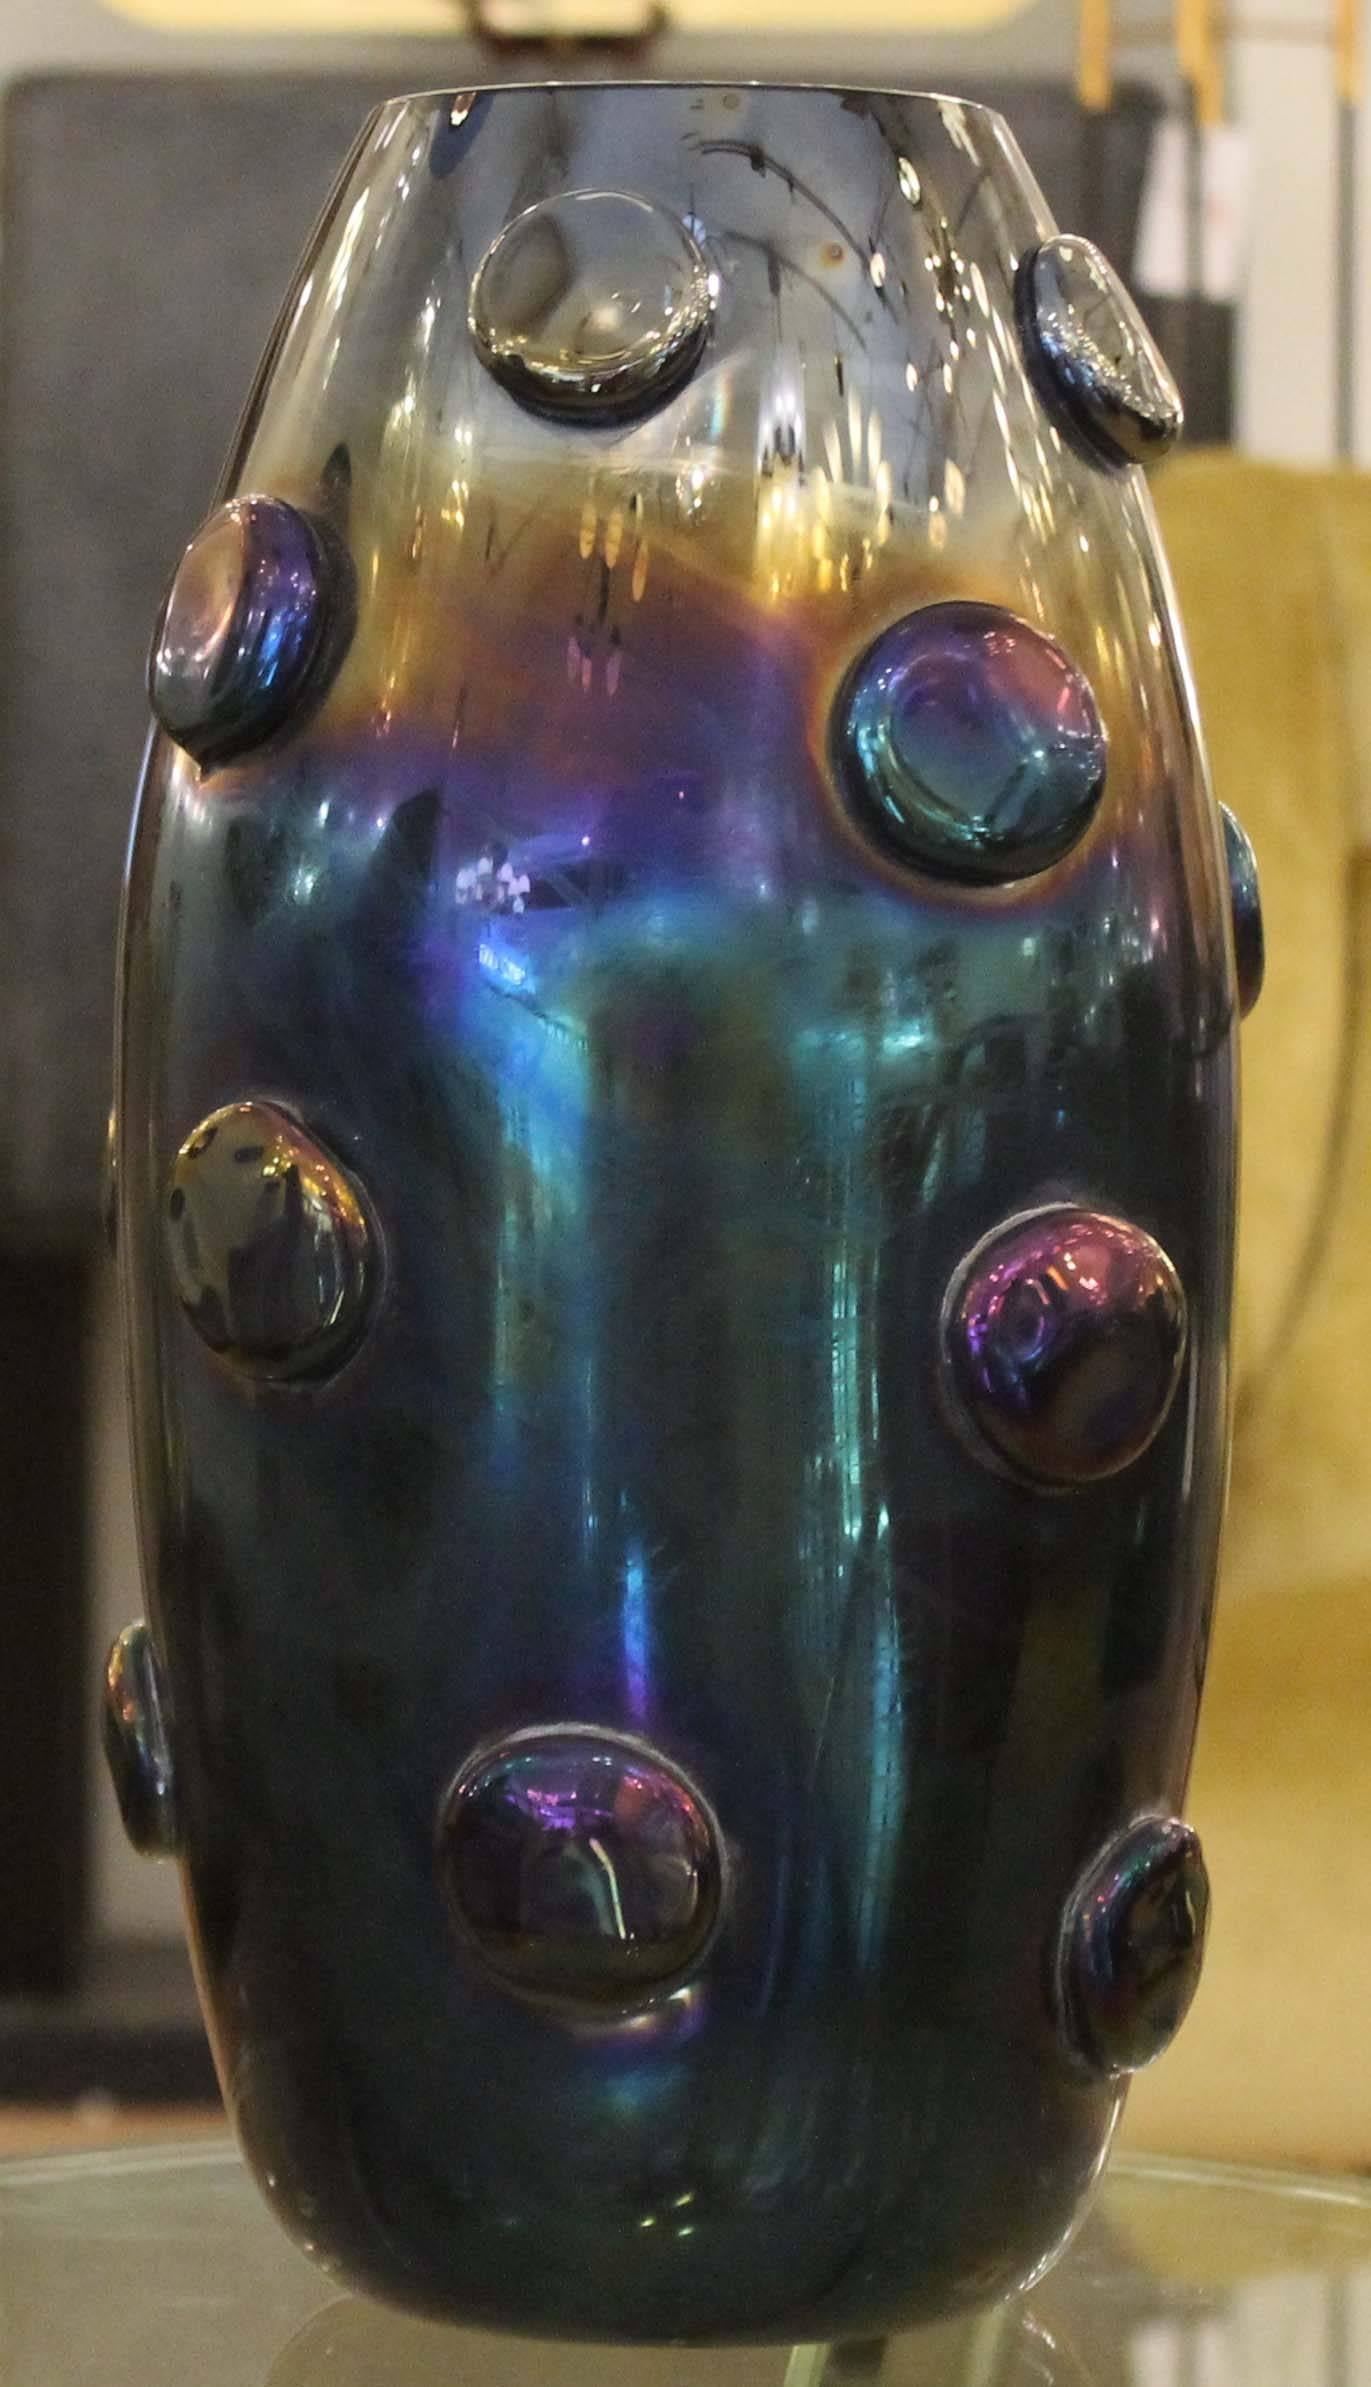 Mysterious looking iridescent vase made by Murano glass blower Alberto Dona.
Signed at the bottom.